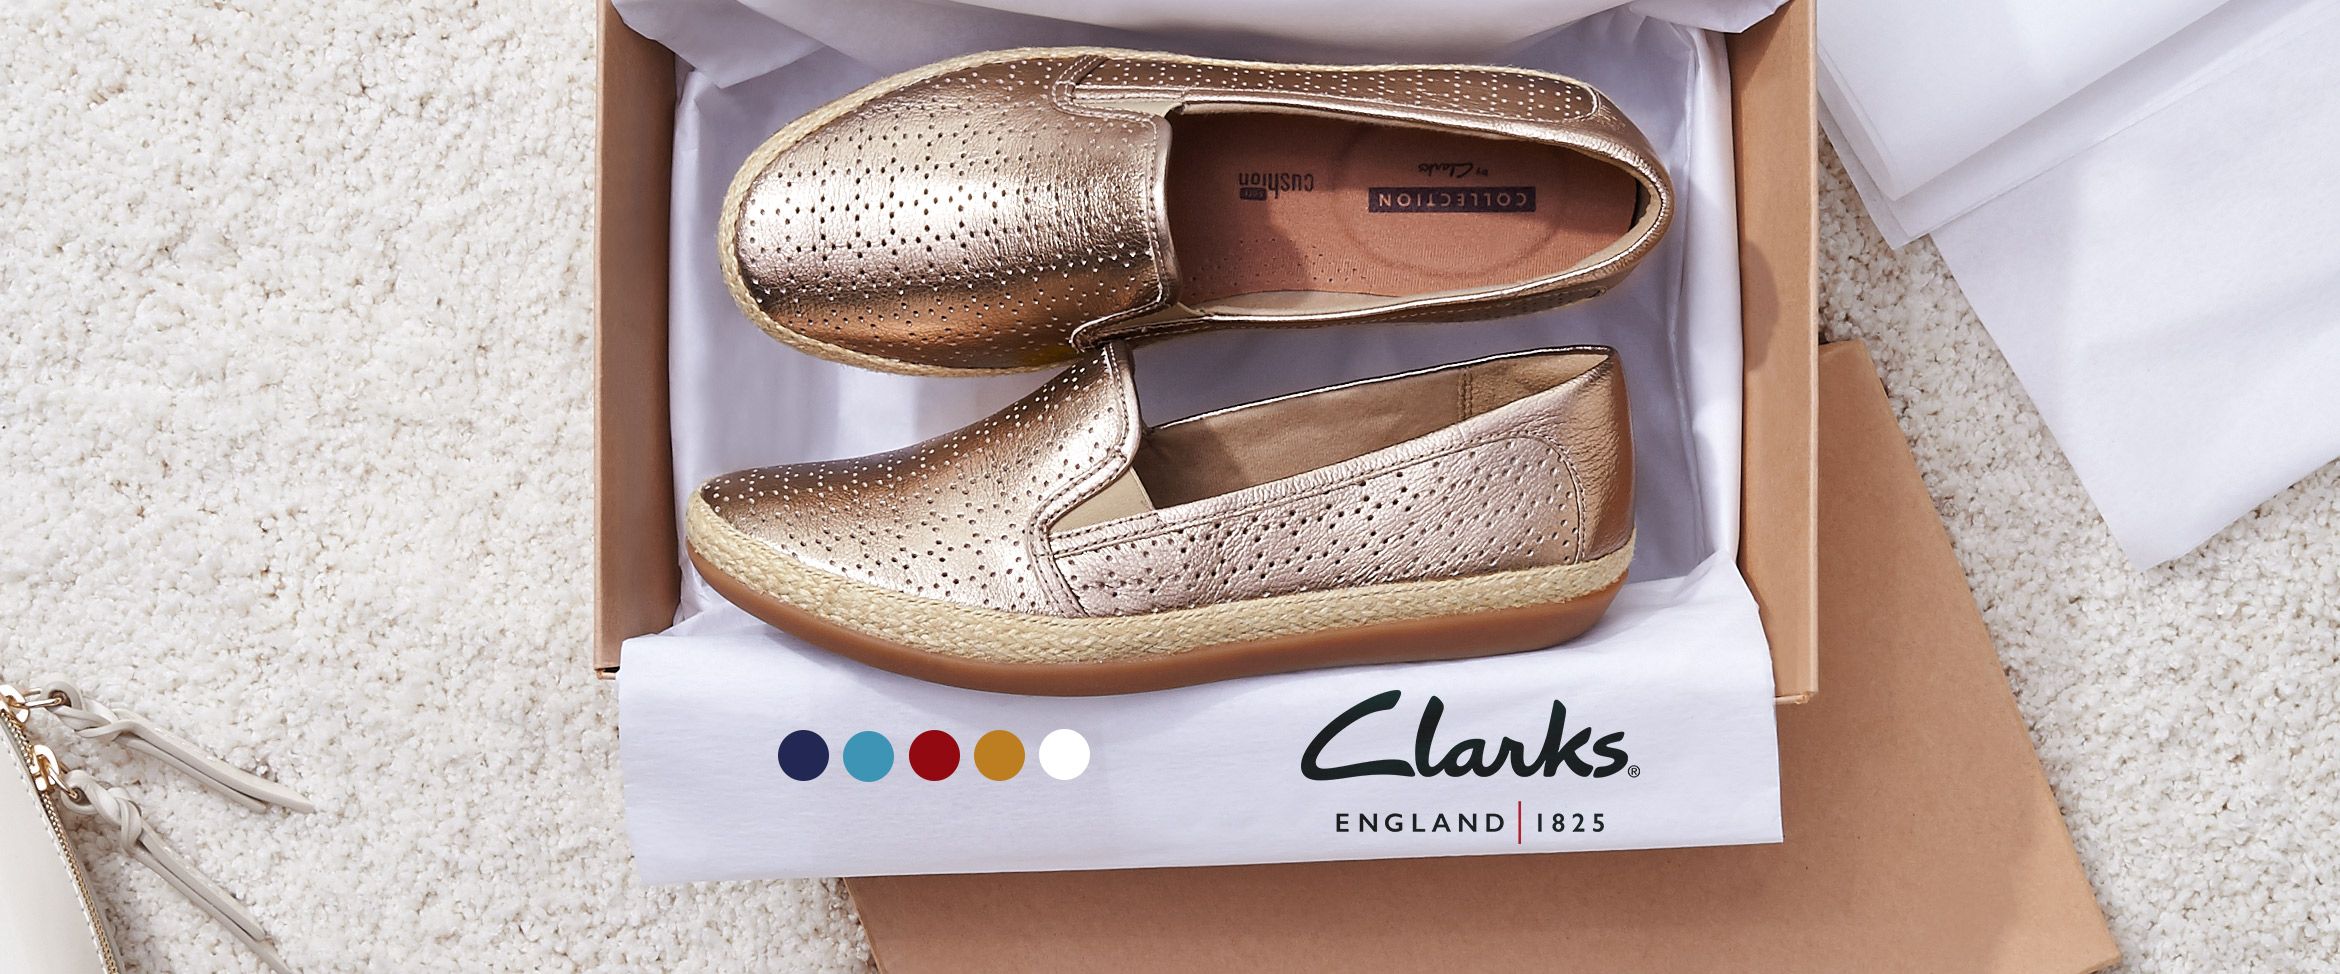 clarks danelly